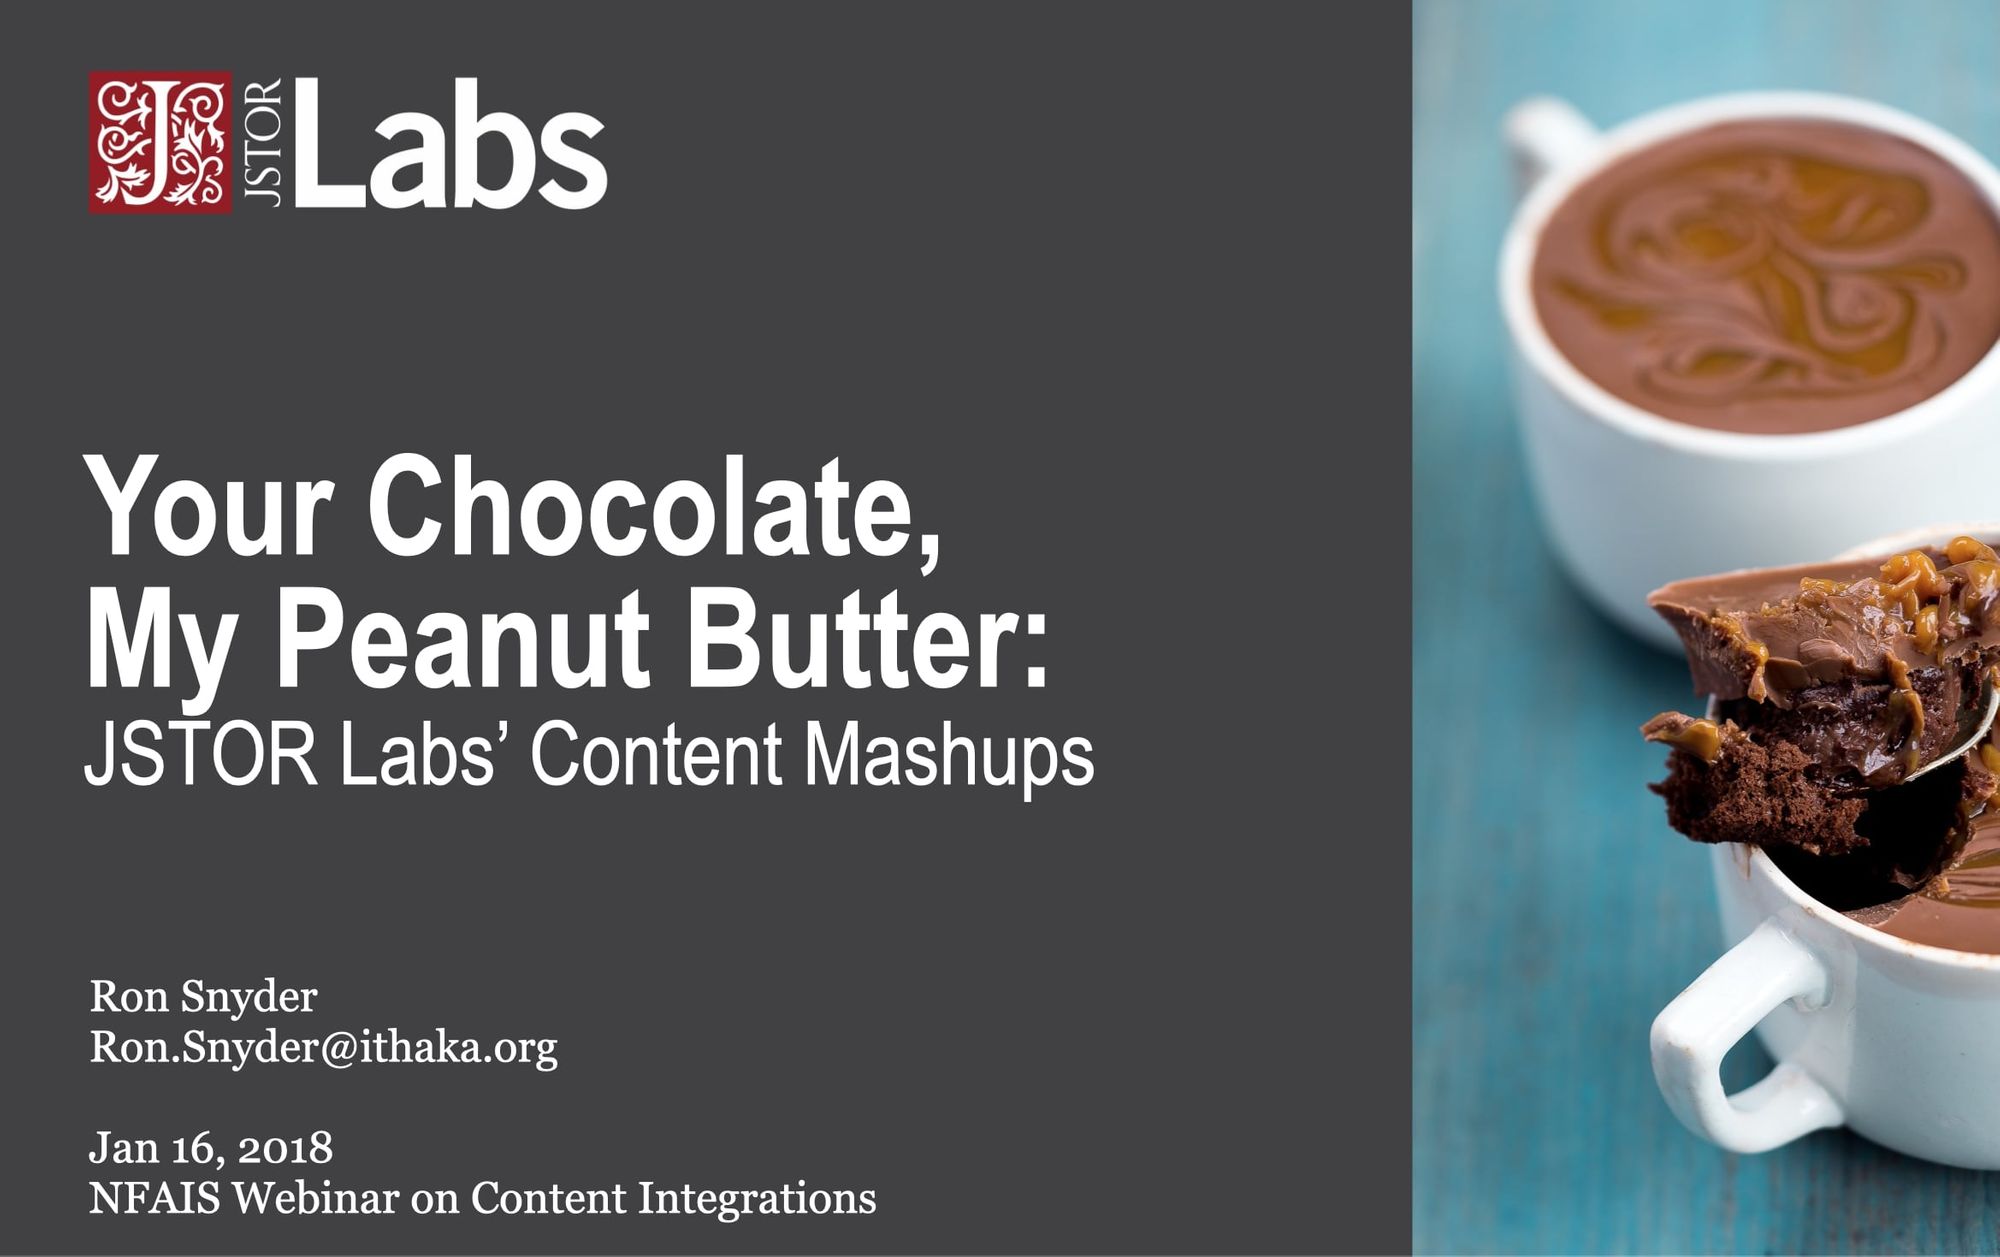 Your Chocolate, My Peanut Butter: JSTOR Labs' Content Mashups